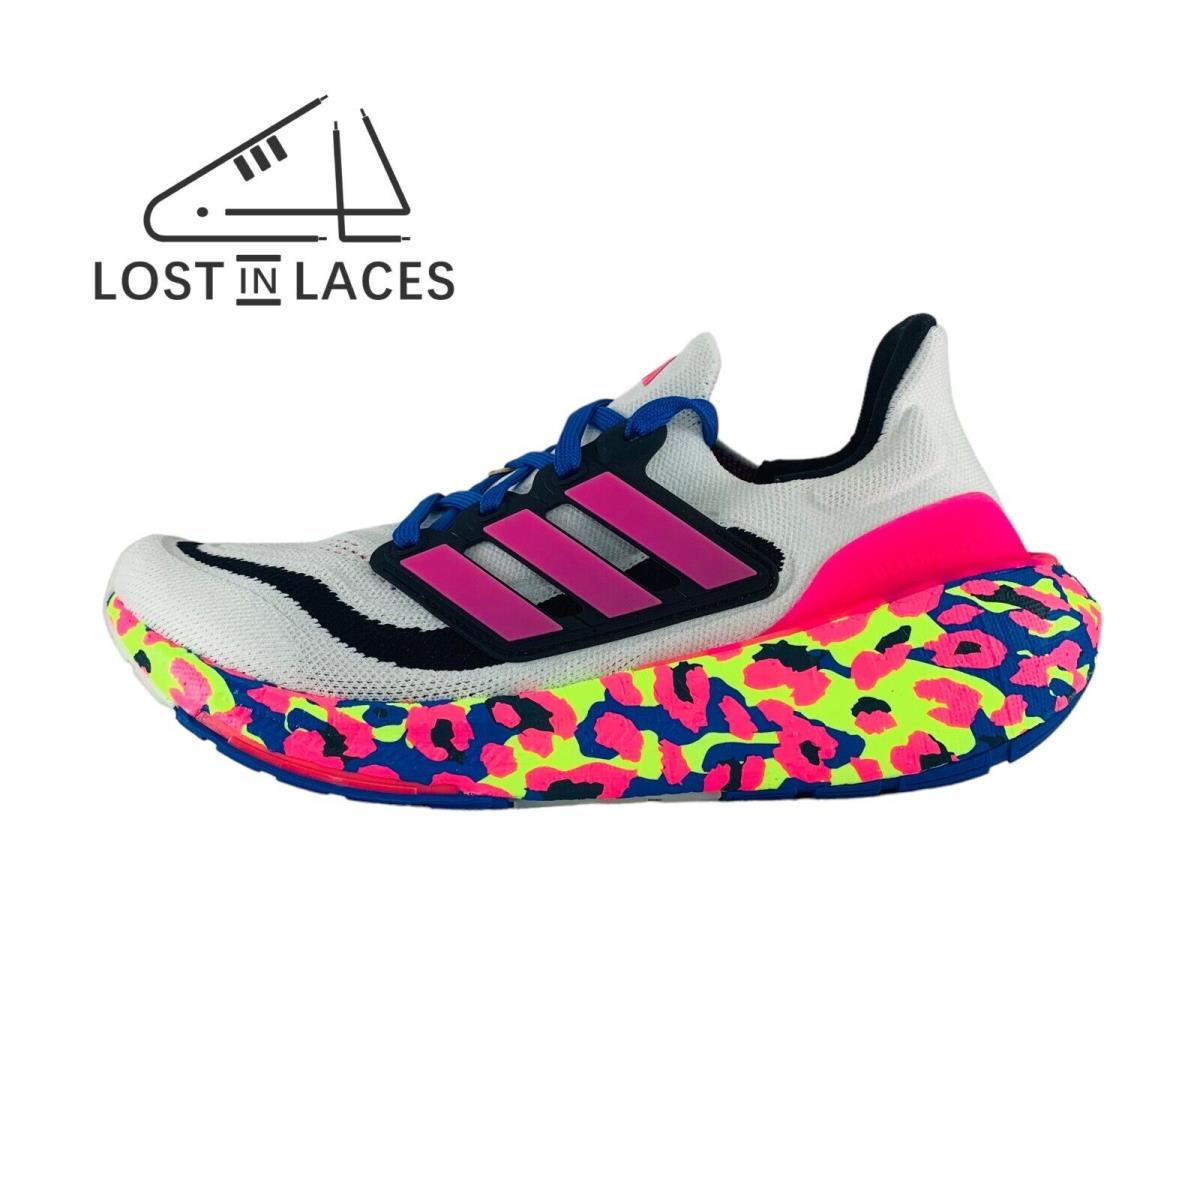 Adidas Ultraboost Light White Pink Multicolor Women`s Running Shoes IE3063